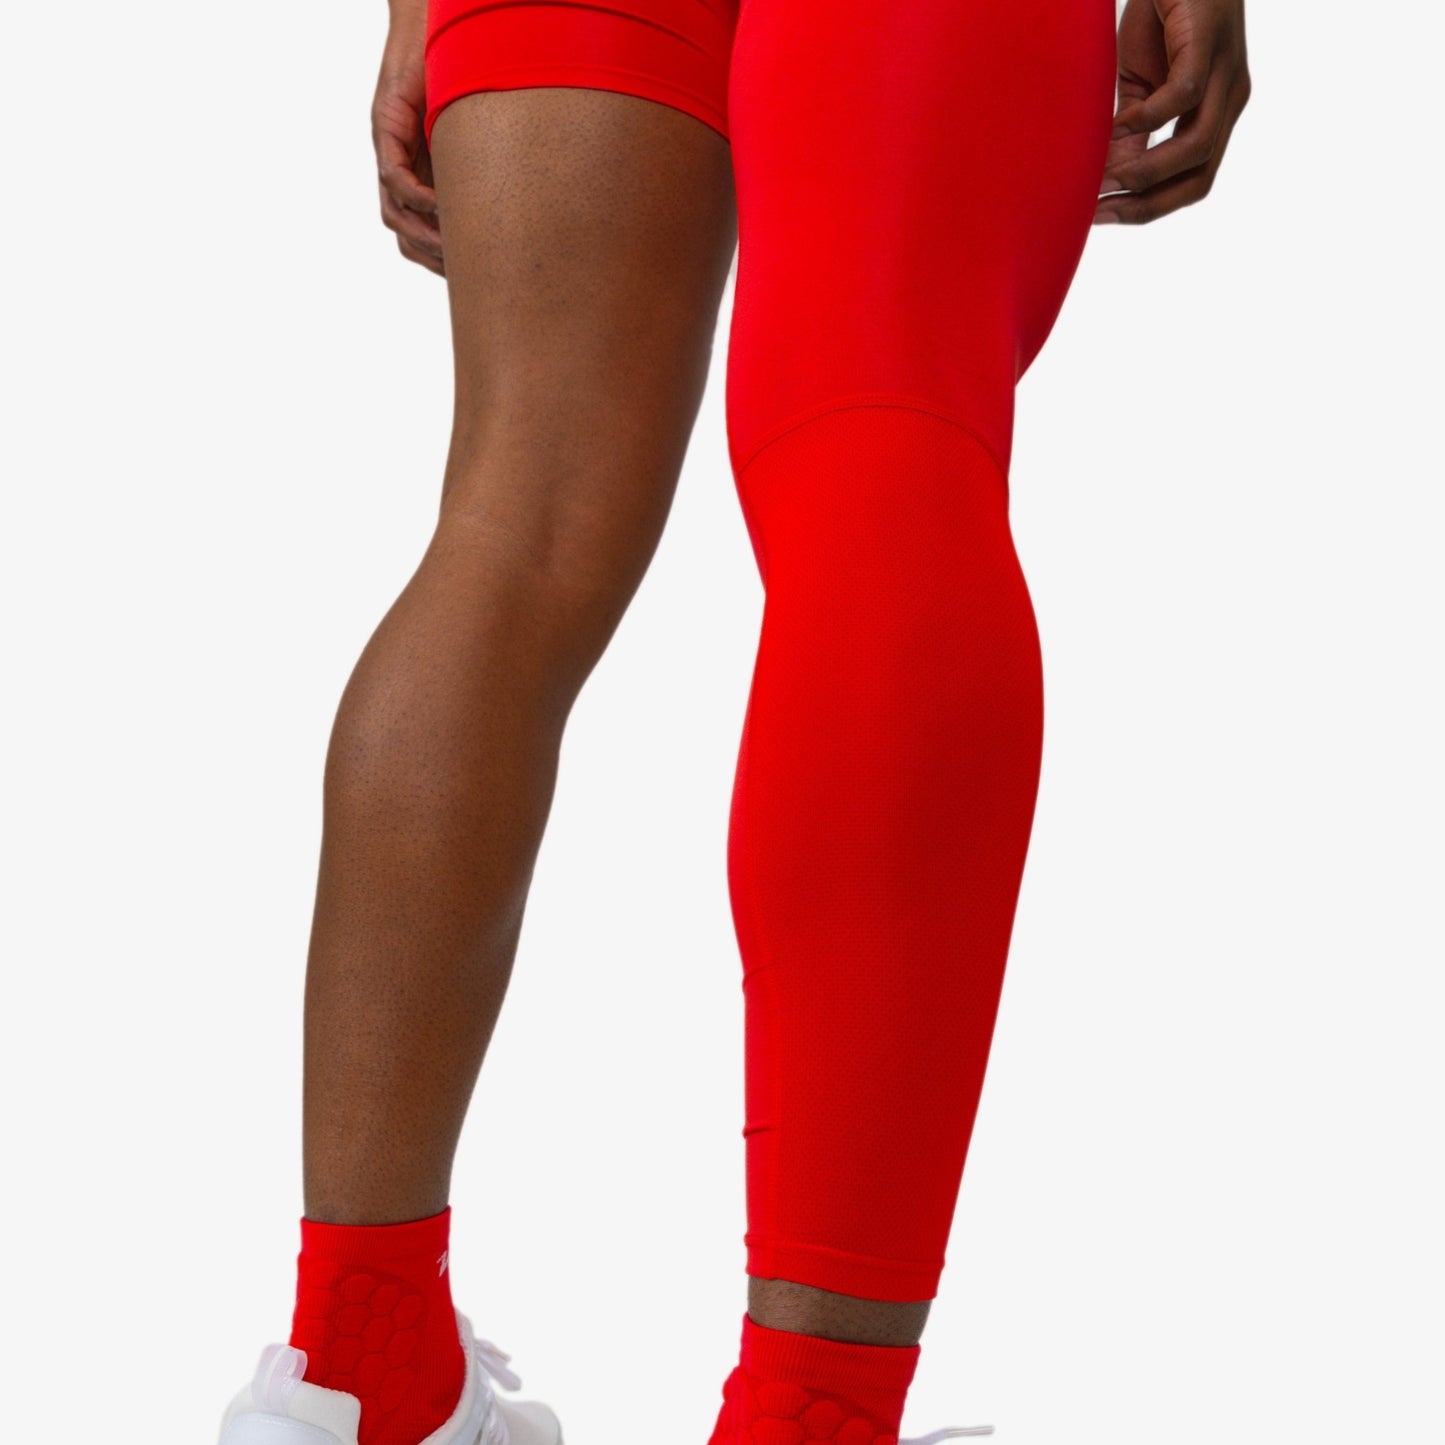 ISO LEG WBTECH™ TIGHTS (RED) - We Ball Sports